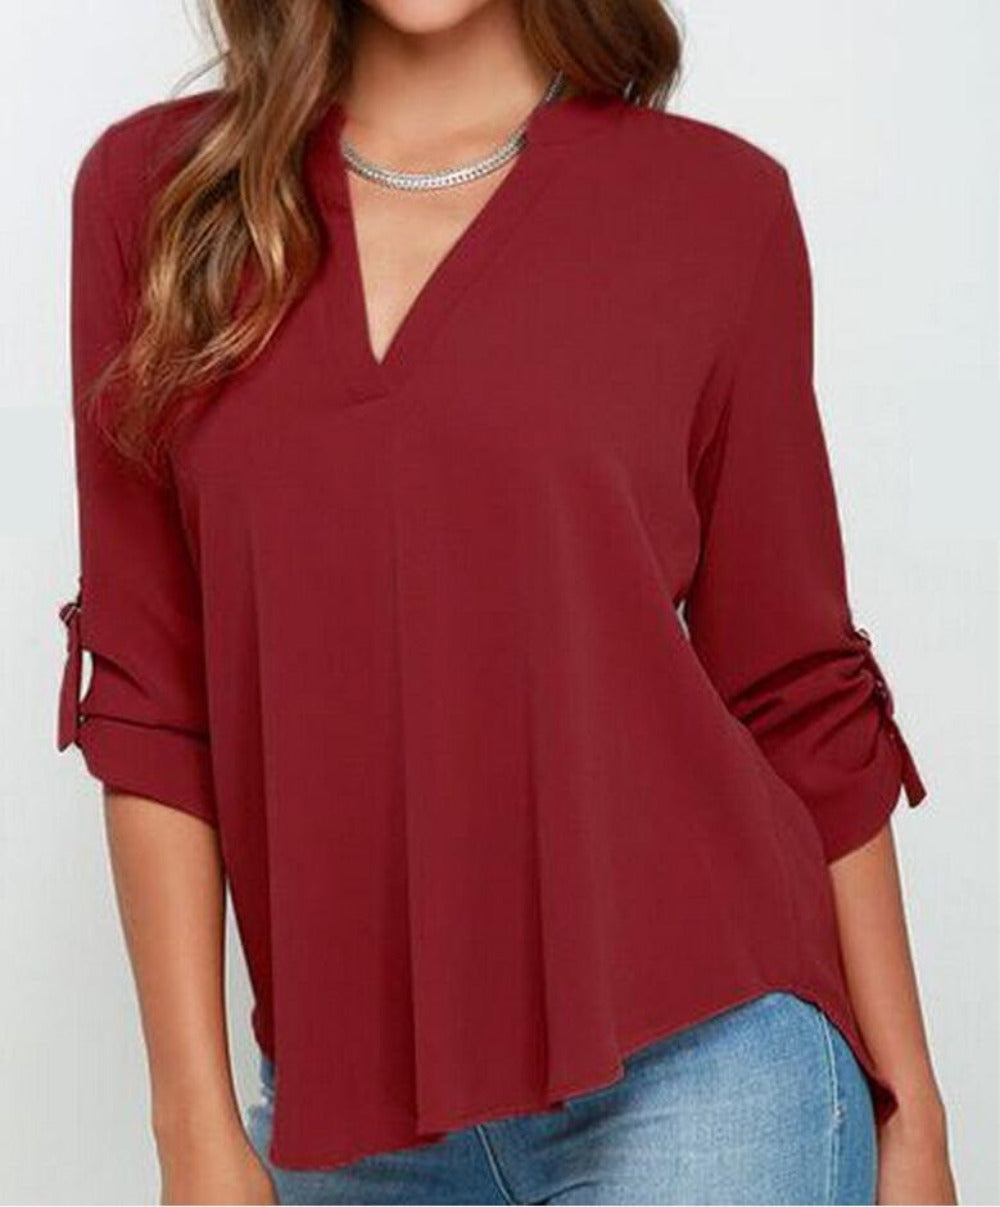 Womens Casual Open Neck Blouse